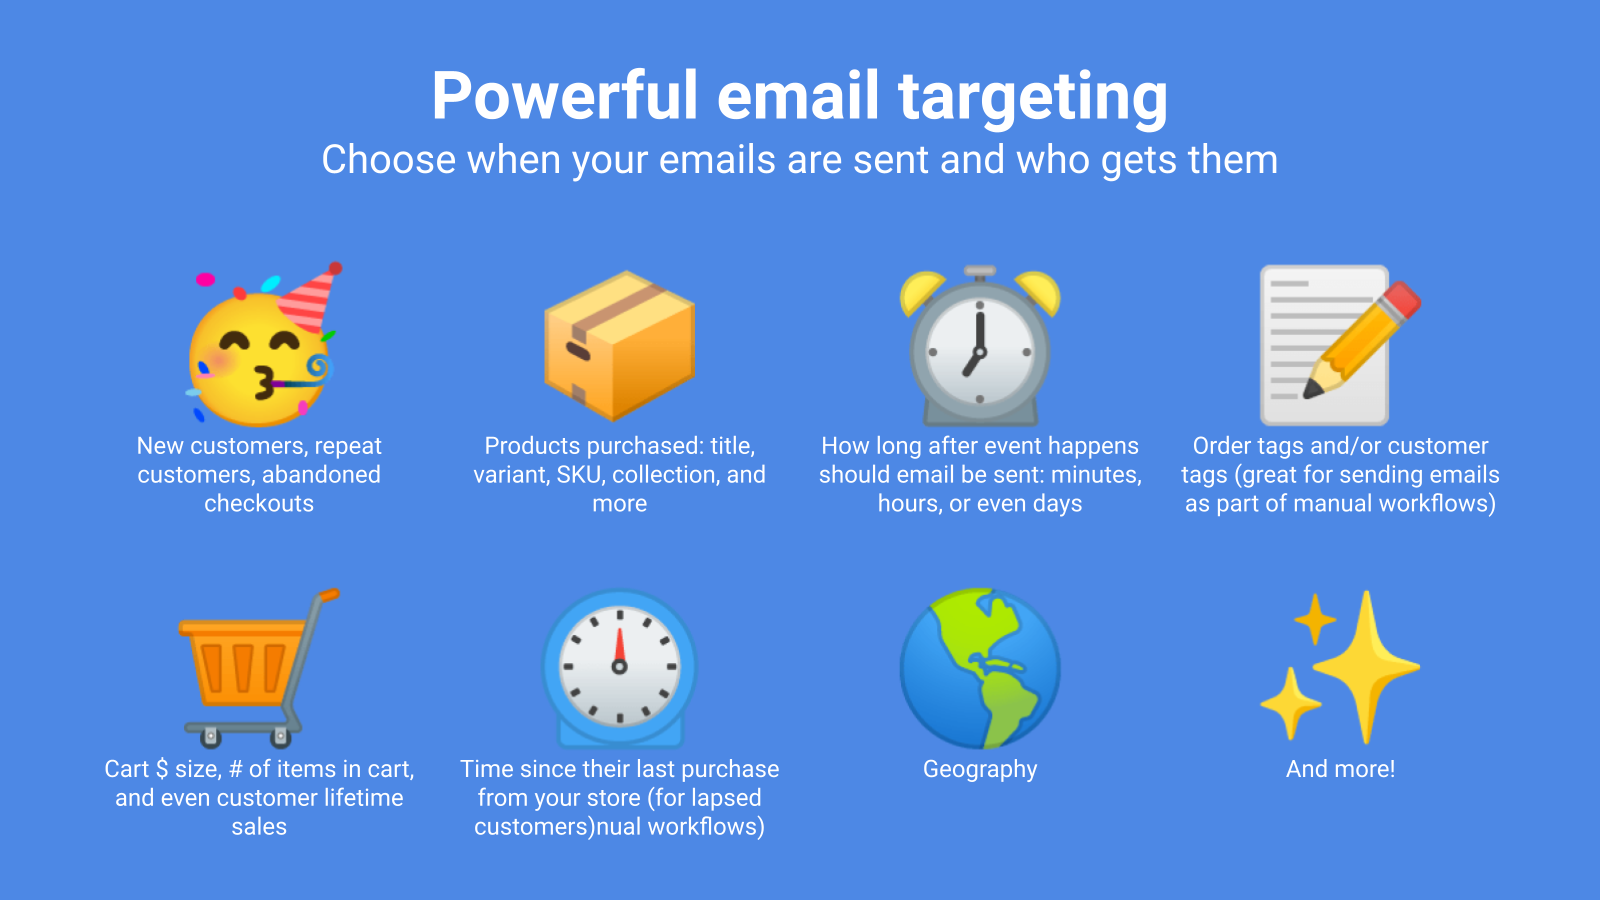 Powerful email targeting options